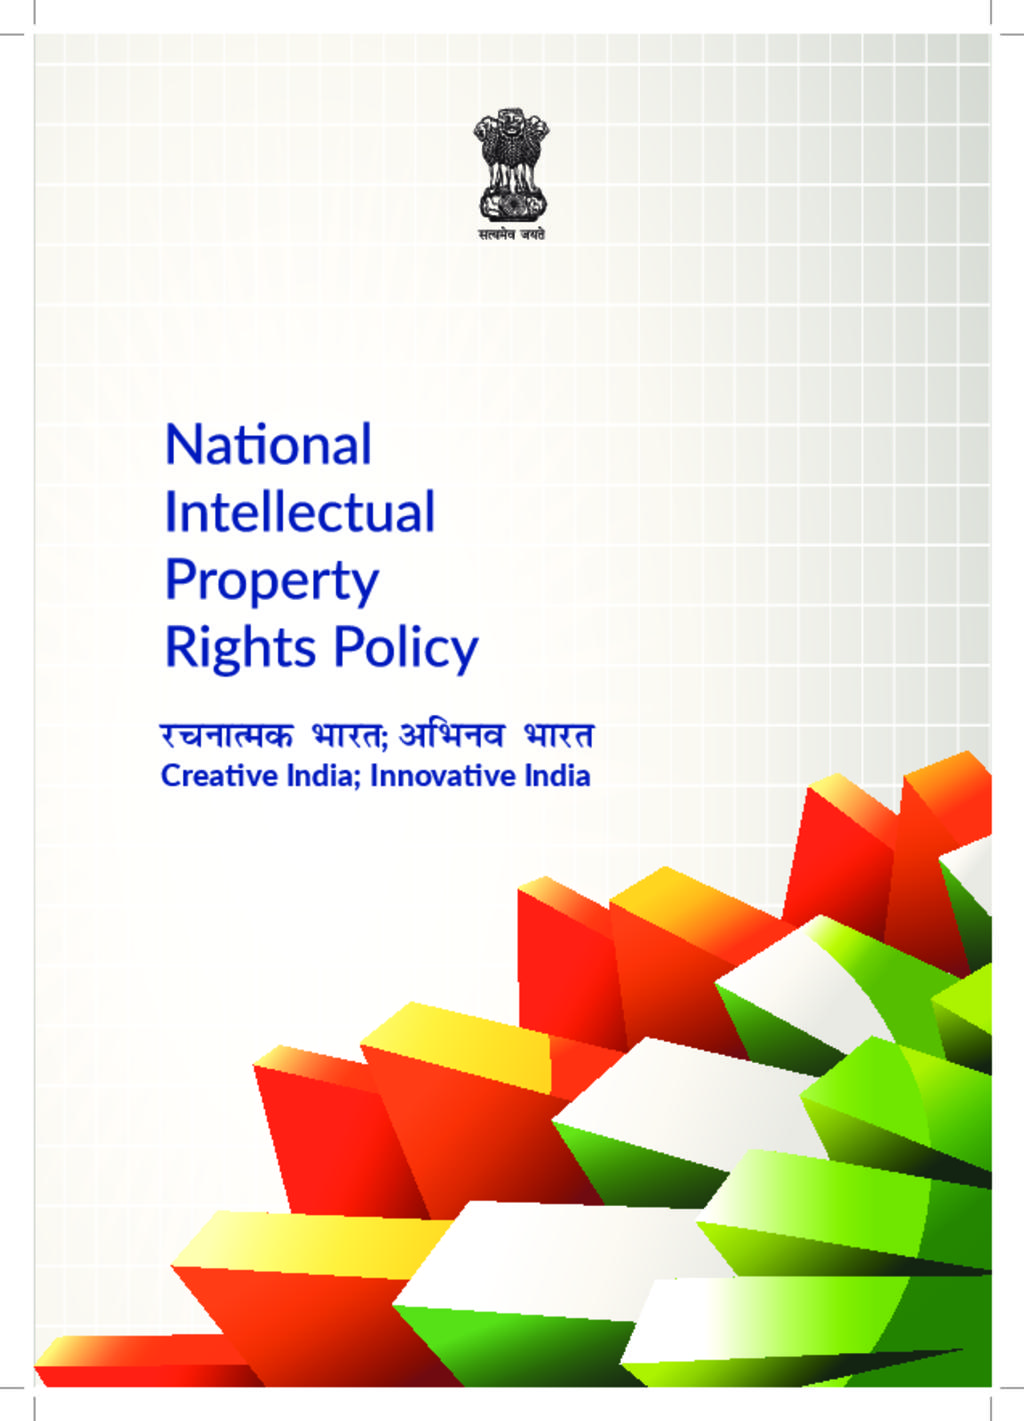 IPR policy